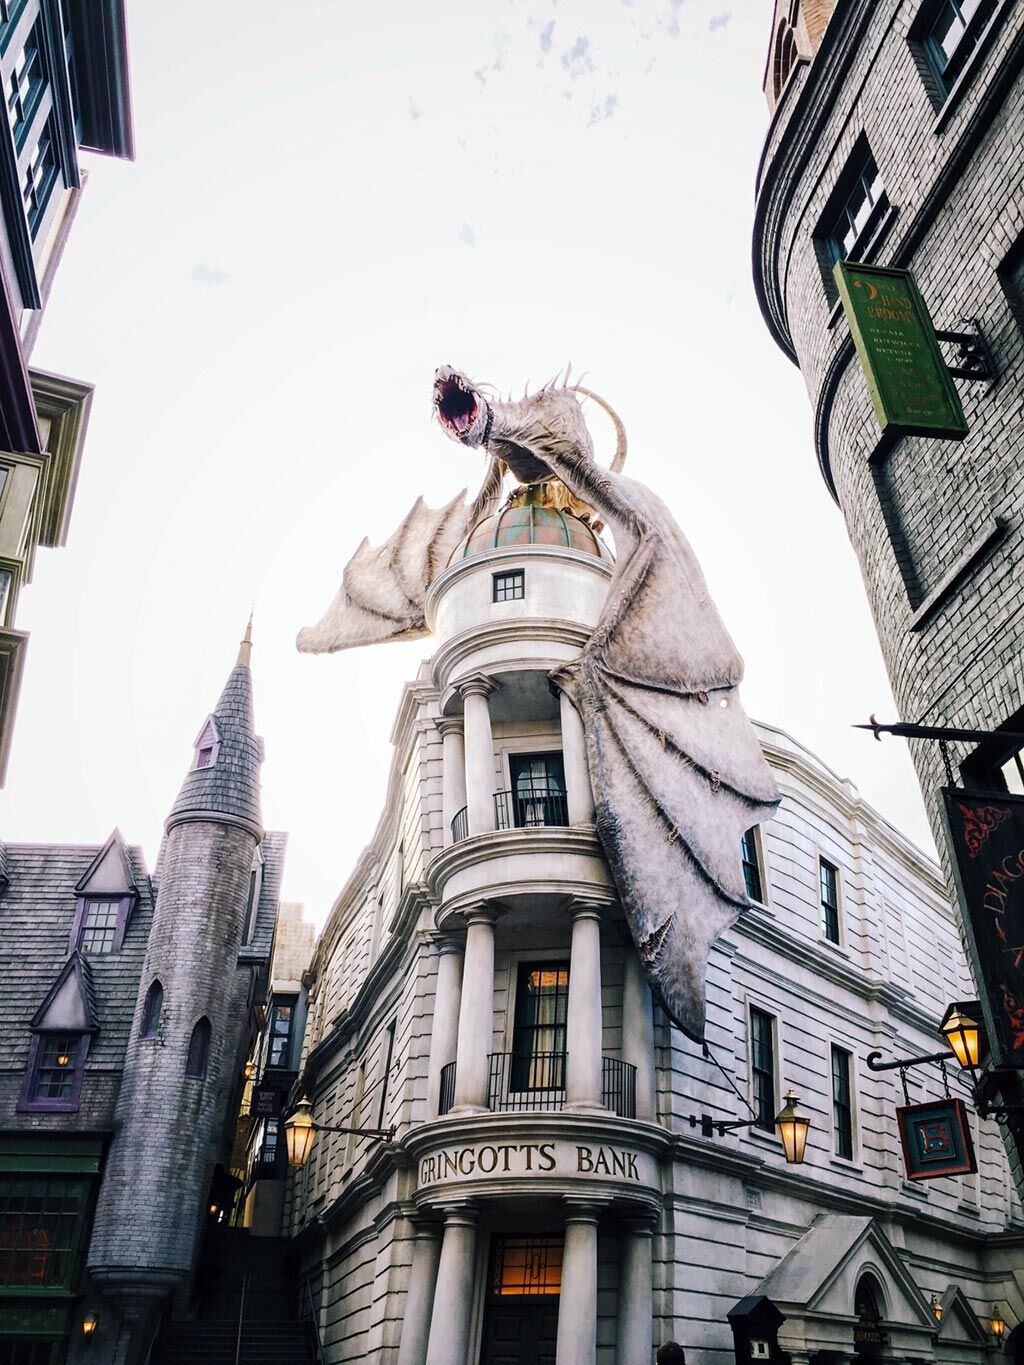 Gringotts bank in the wizarding world of harry potter